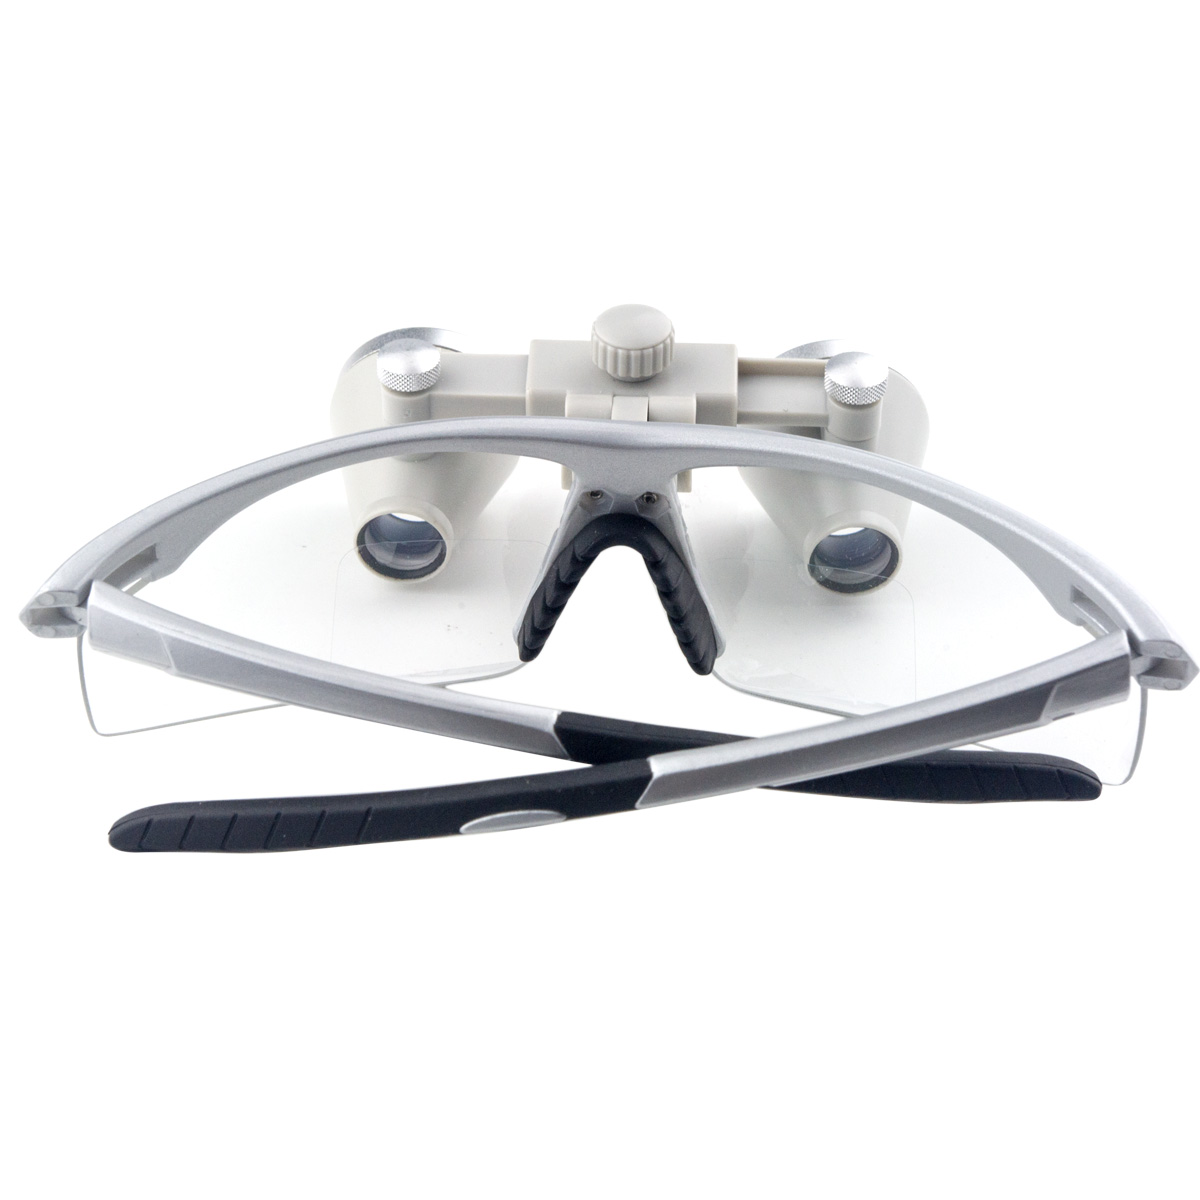 3.5 x Magnification Professional Dental Loupes Silver BP Sports Frame and Adjustable Pupil Distance Model #CH350